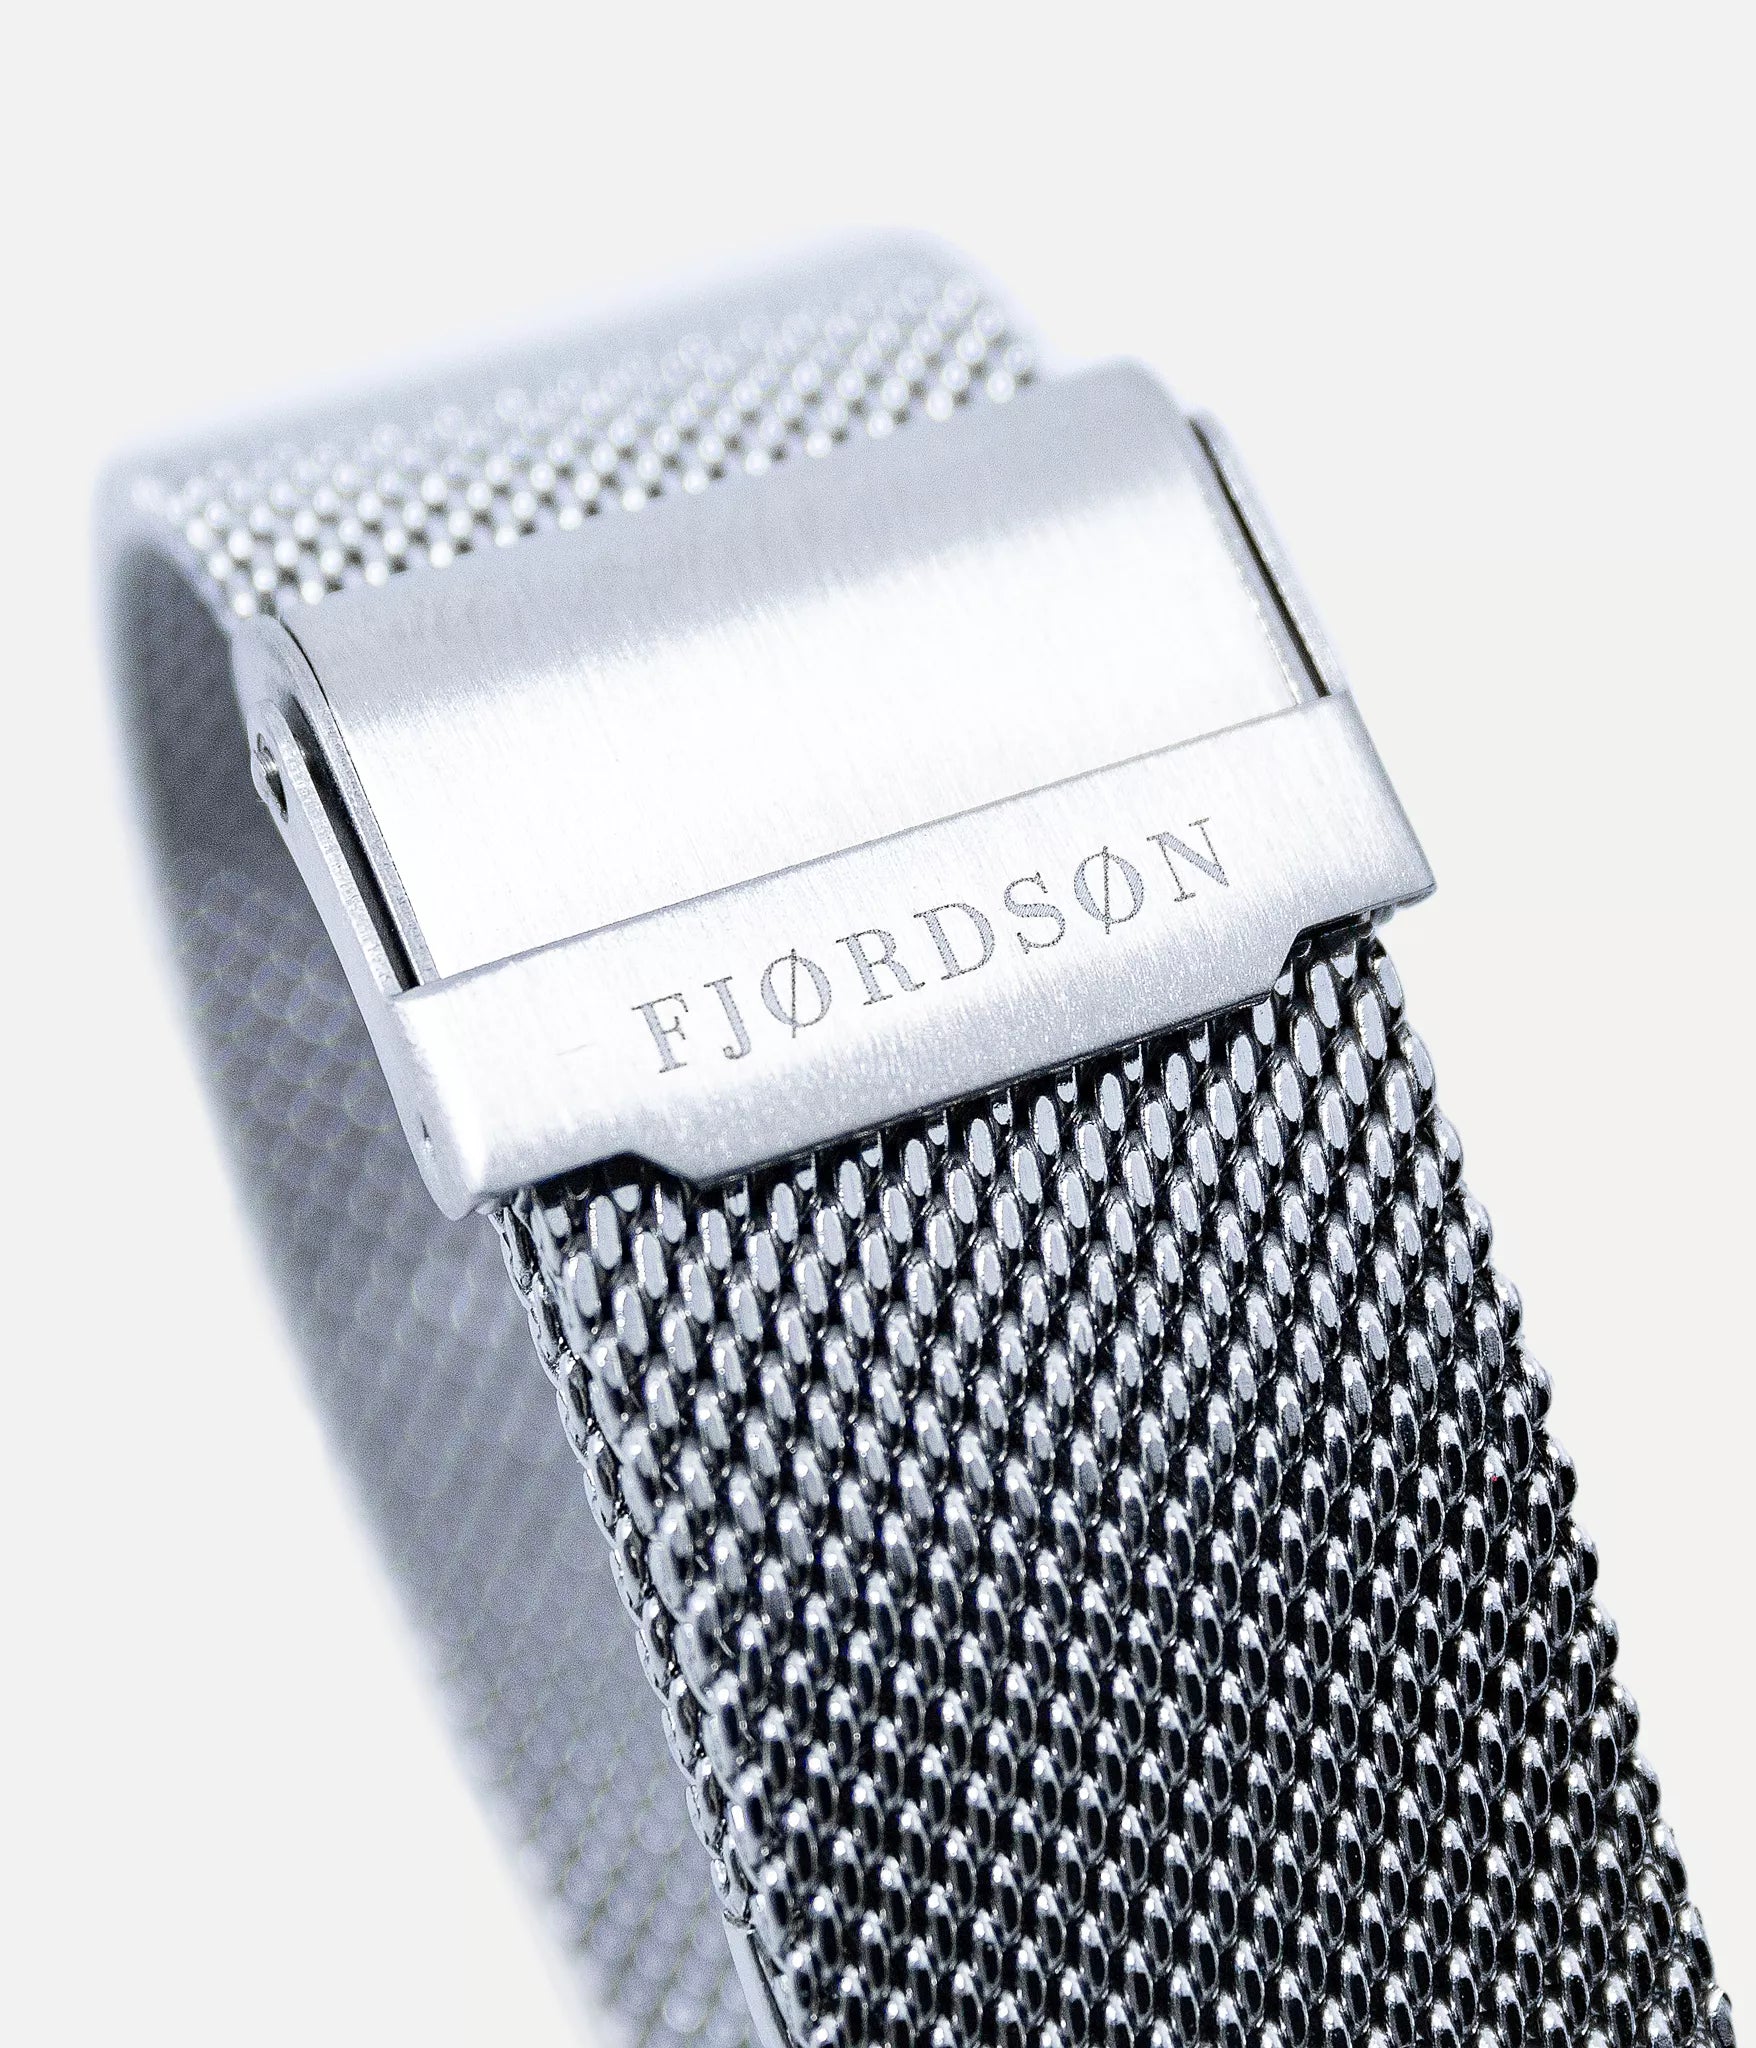 Strap detail shot - Fjordson matching watches with black dial and silver metal watch strap - Couple Watches Gift set - vegan & approved by PETA - Swiss made